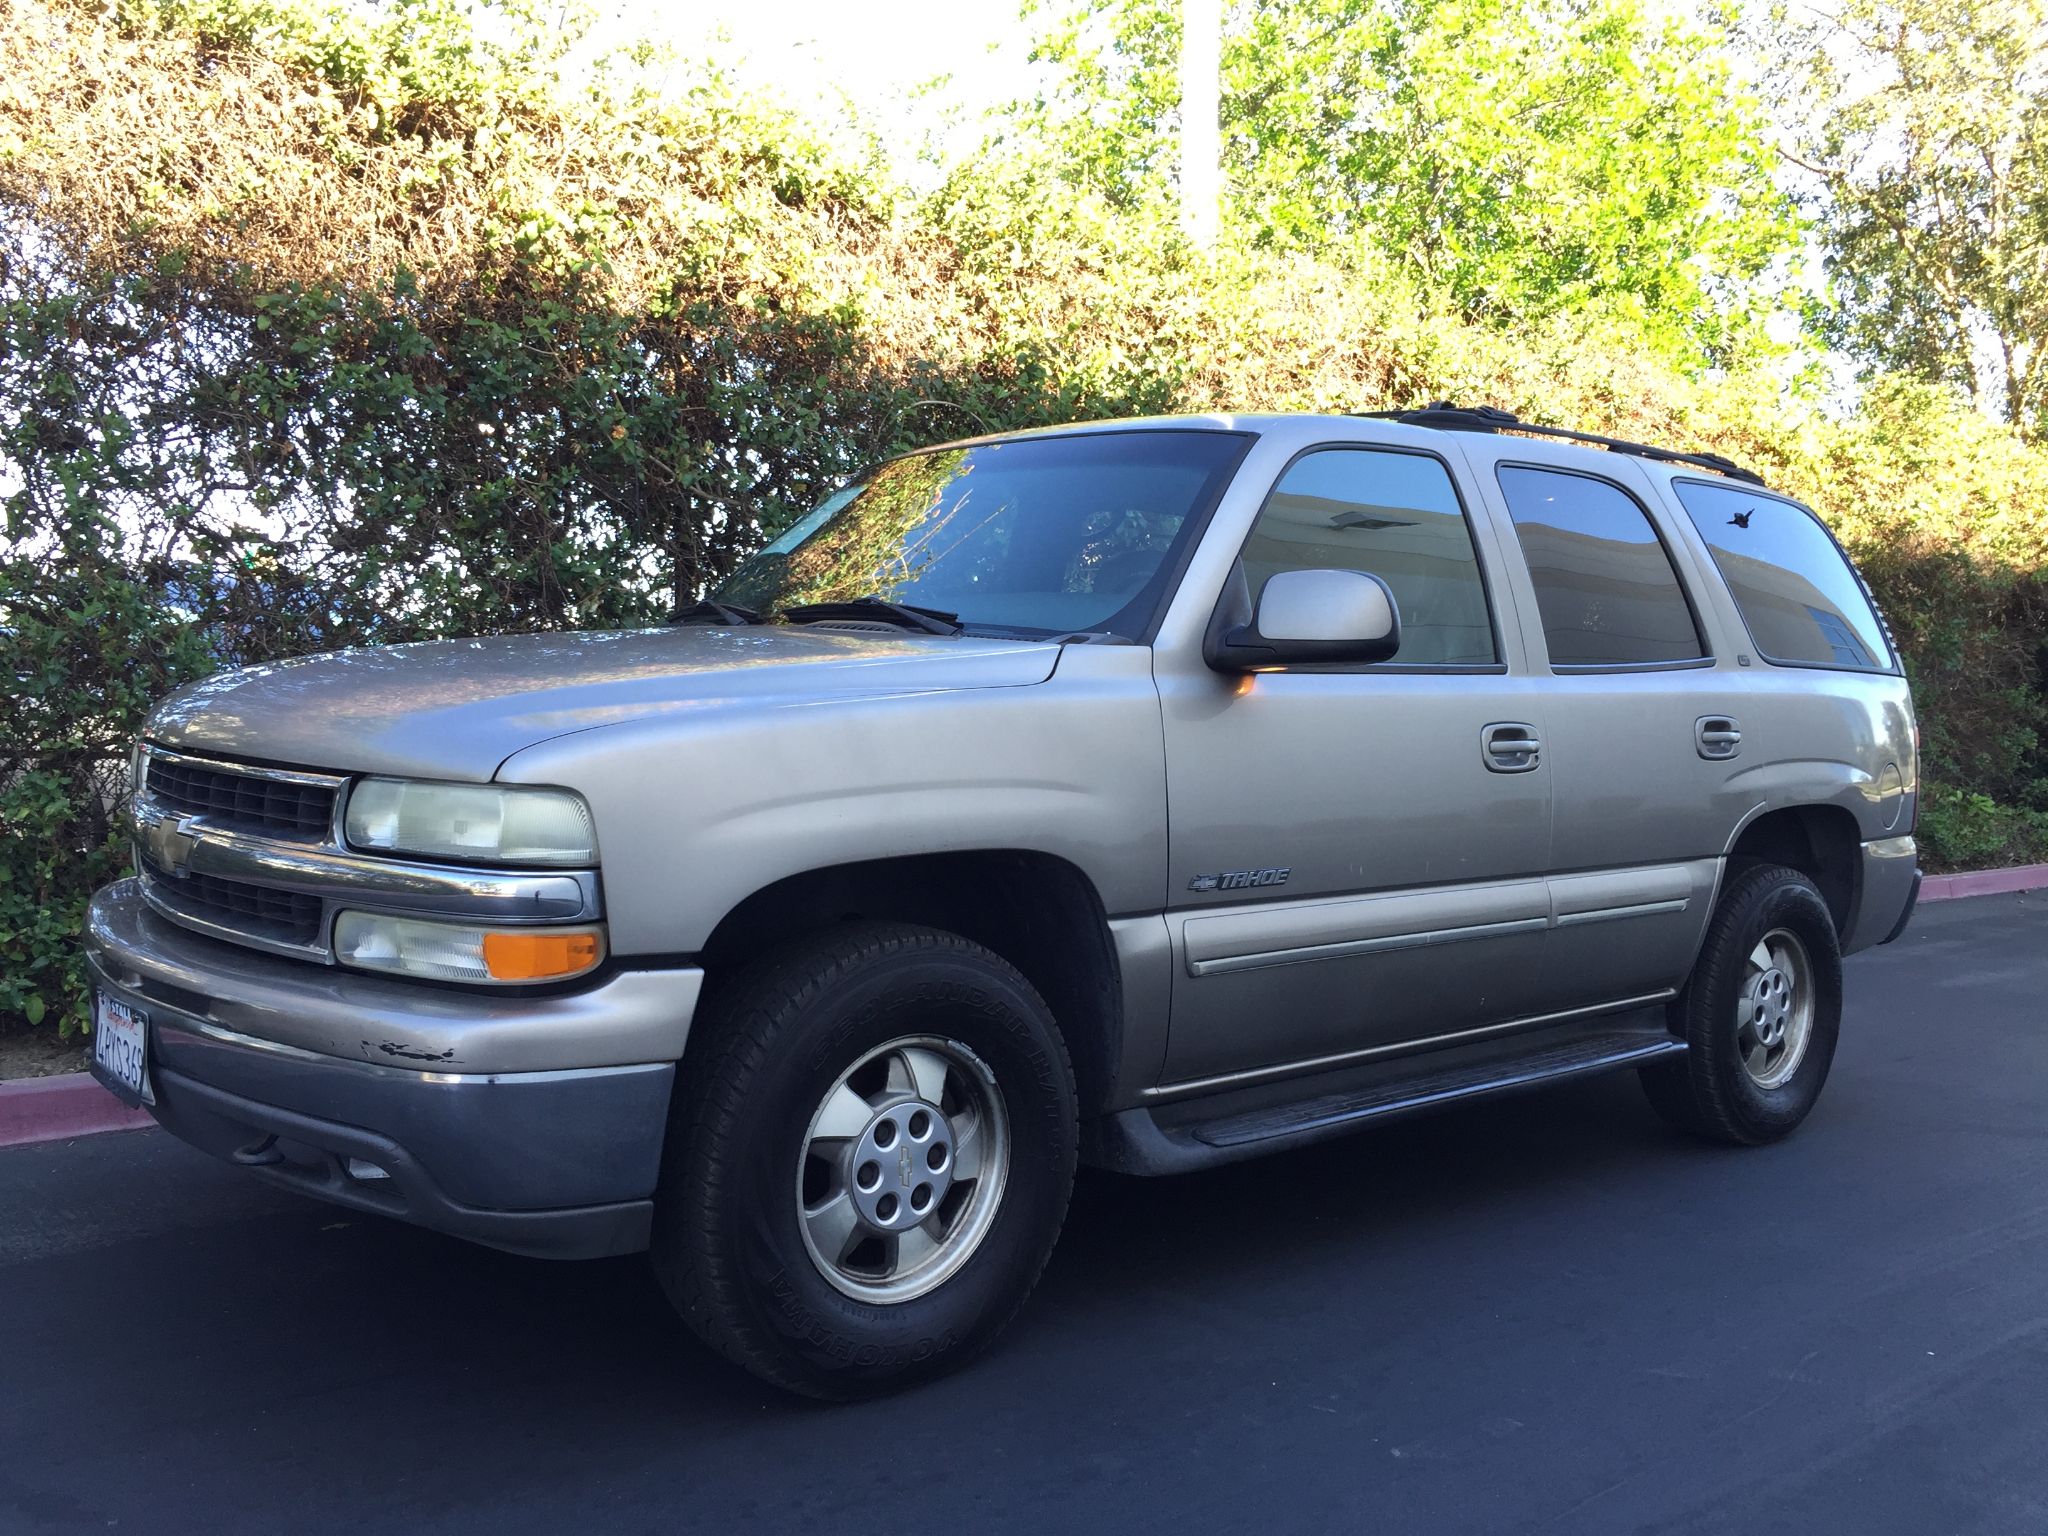 Used 2001 Chevrolet Tahoe LS at City Cars Warehouse INC